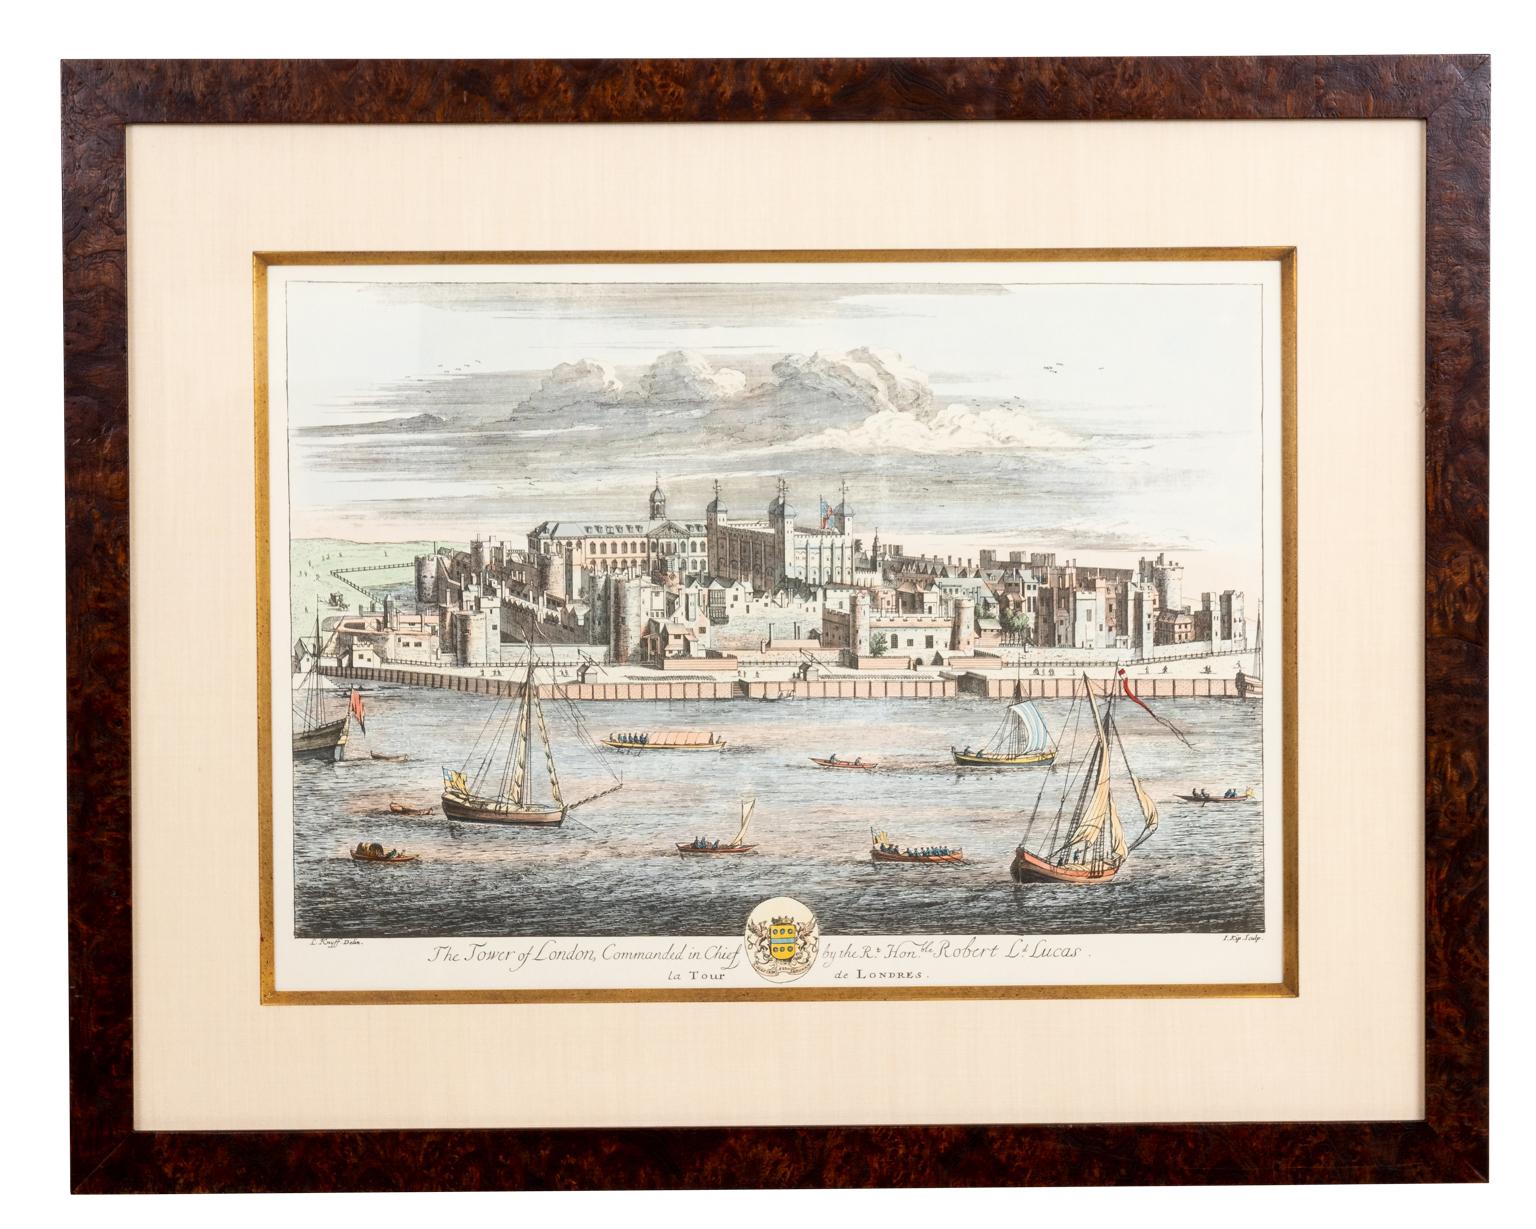 Circa 2000s set of four framed British architectural colored plates framed by J. Pocker with linen mats and gold gilt filets. The set includes illustrations of notable British architectural landmarks such as: the Tower of London, Windsor Castle,